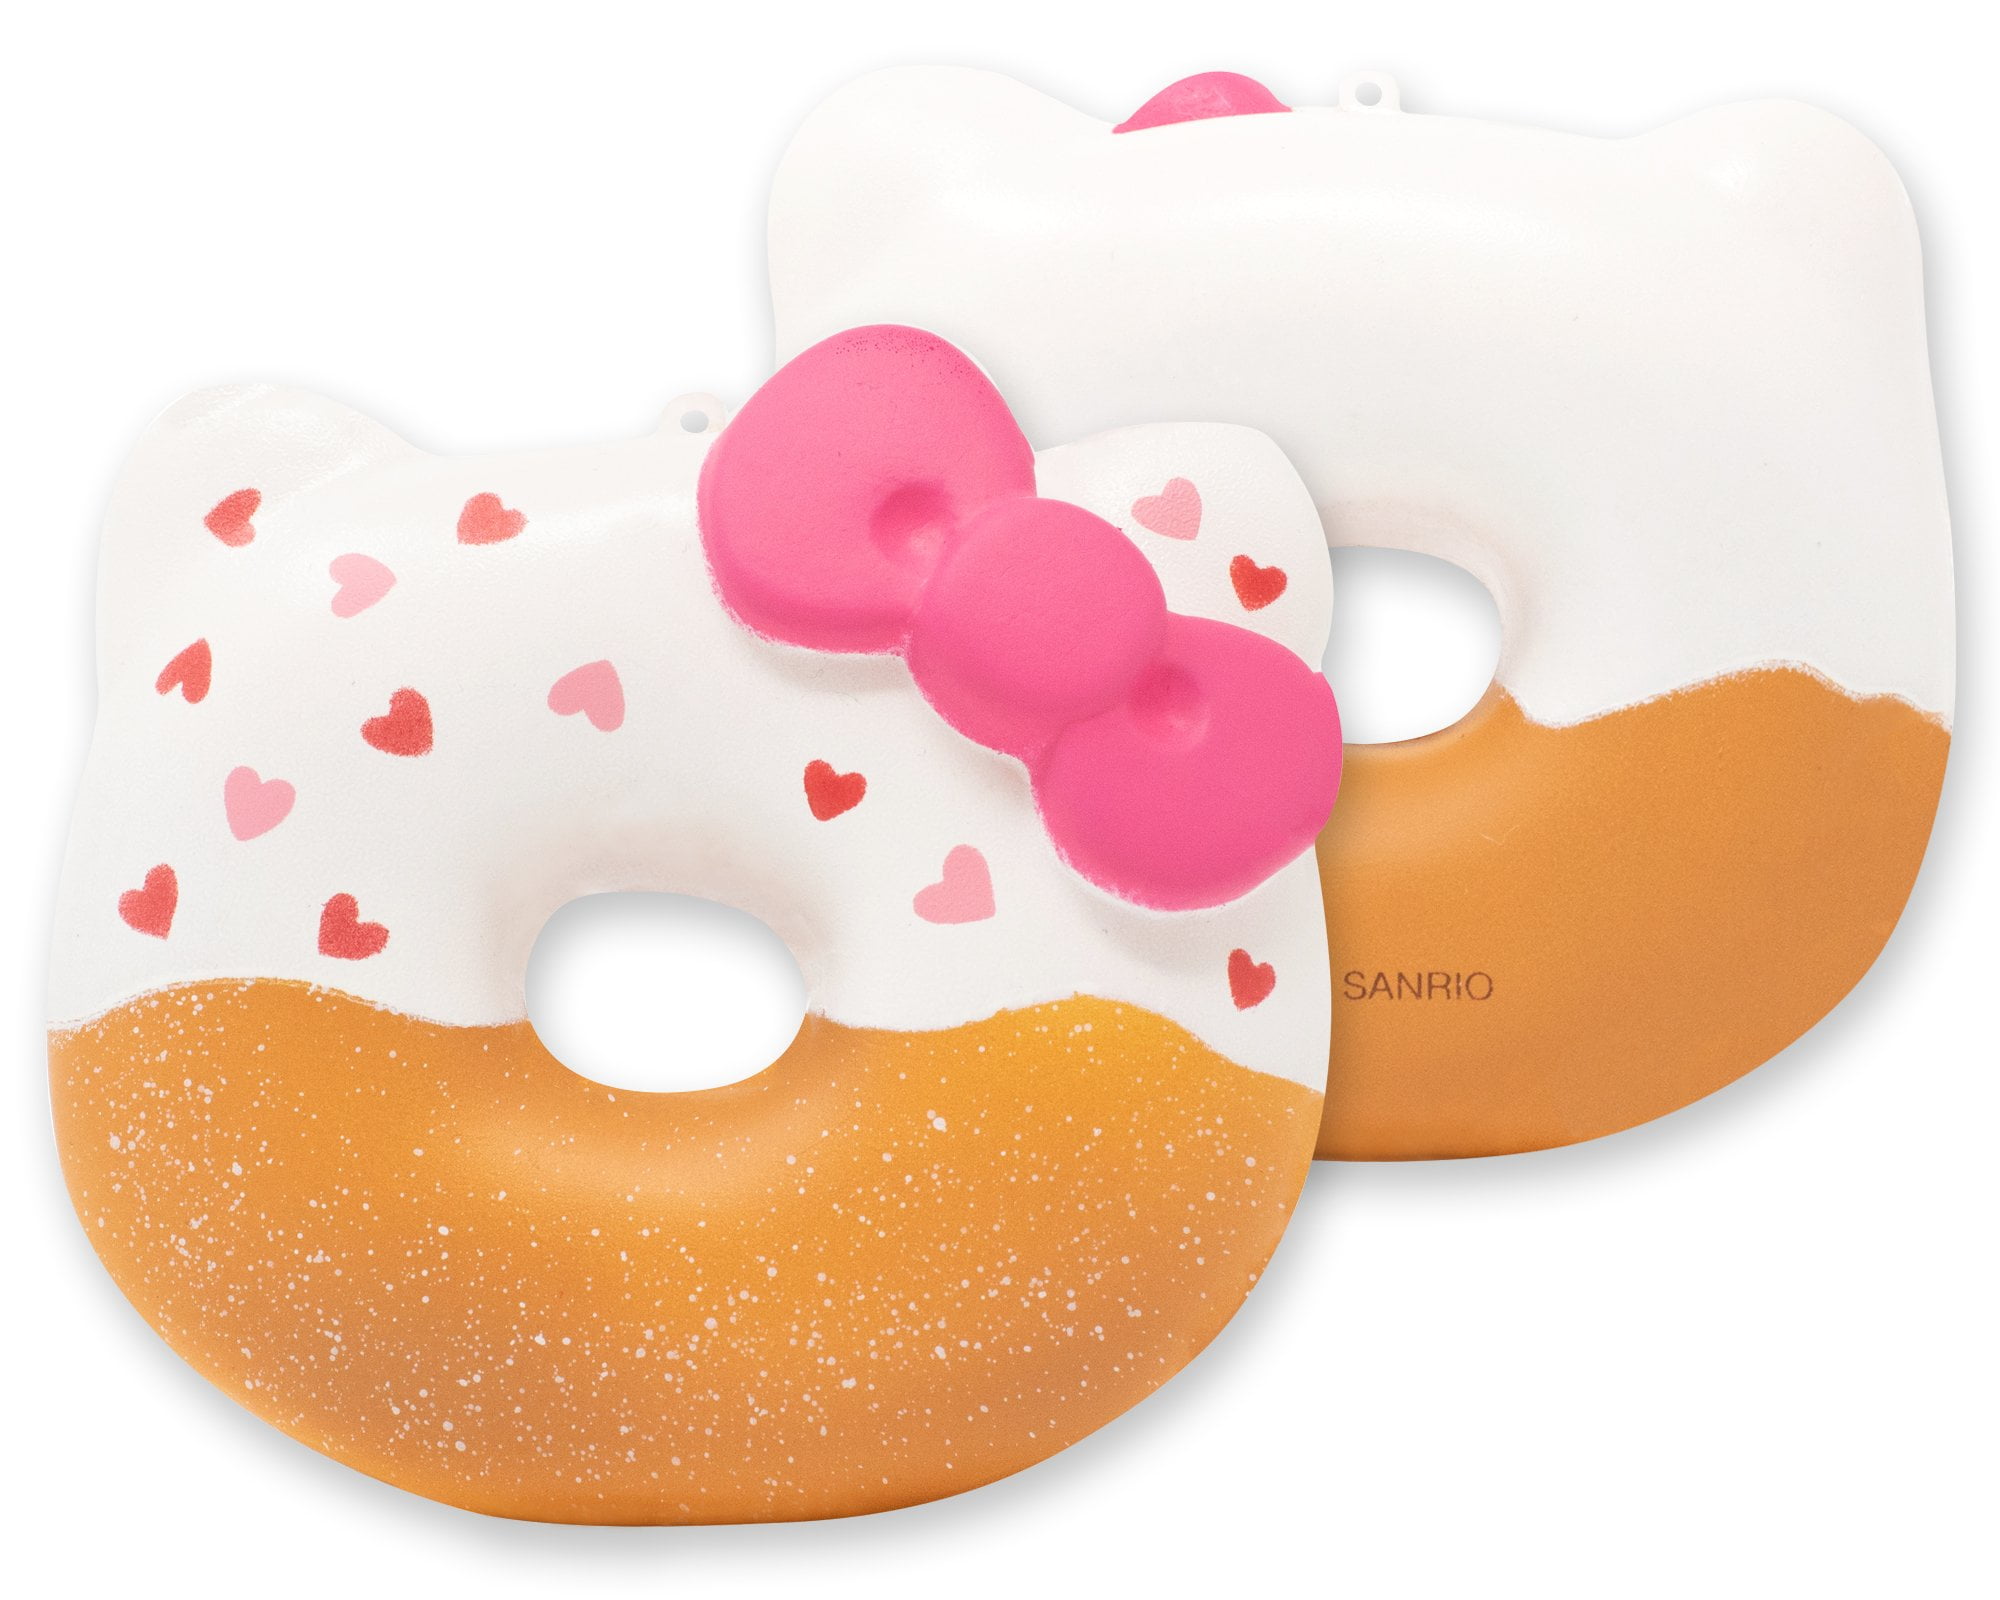 Kawaii Squishies for Kids Sanrio Hello Kitty Ice Cream Donut Slow Rising Squishy Toy Keychain Birthday Gift Boxes Girls Sprinkles for Party Favors Adults Boys Stress Balls 